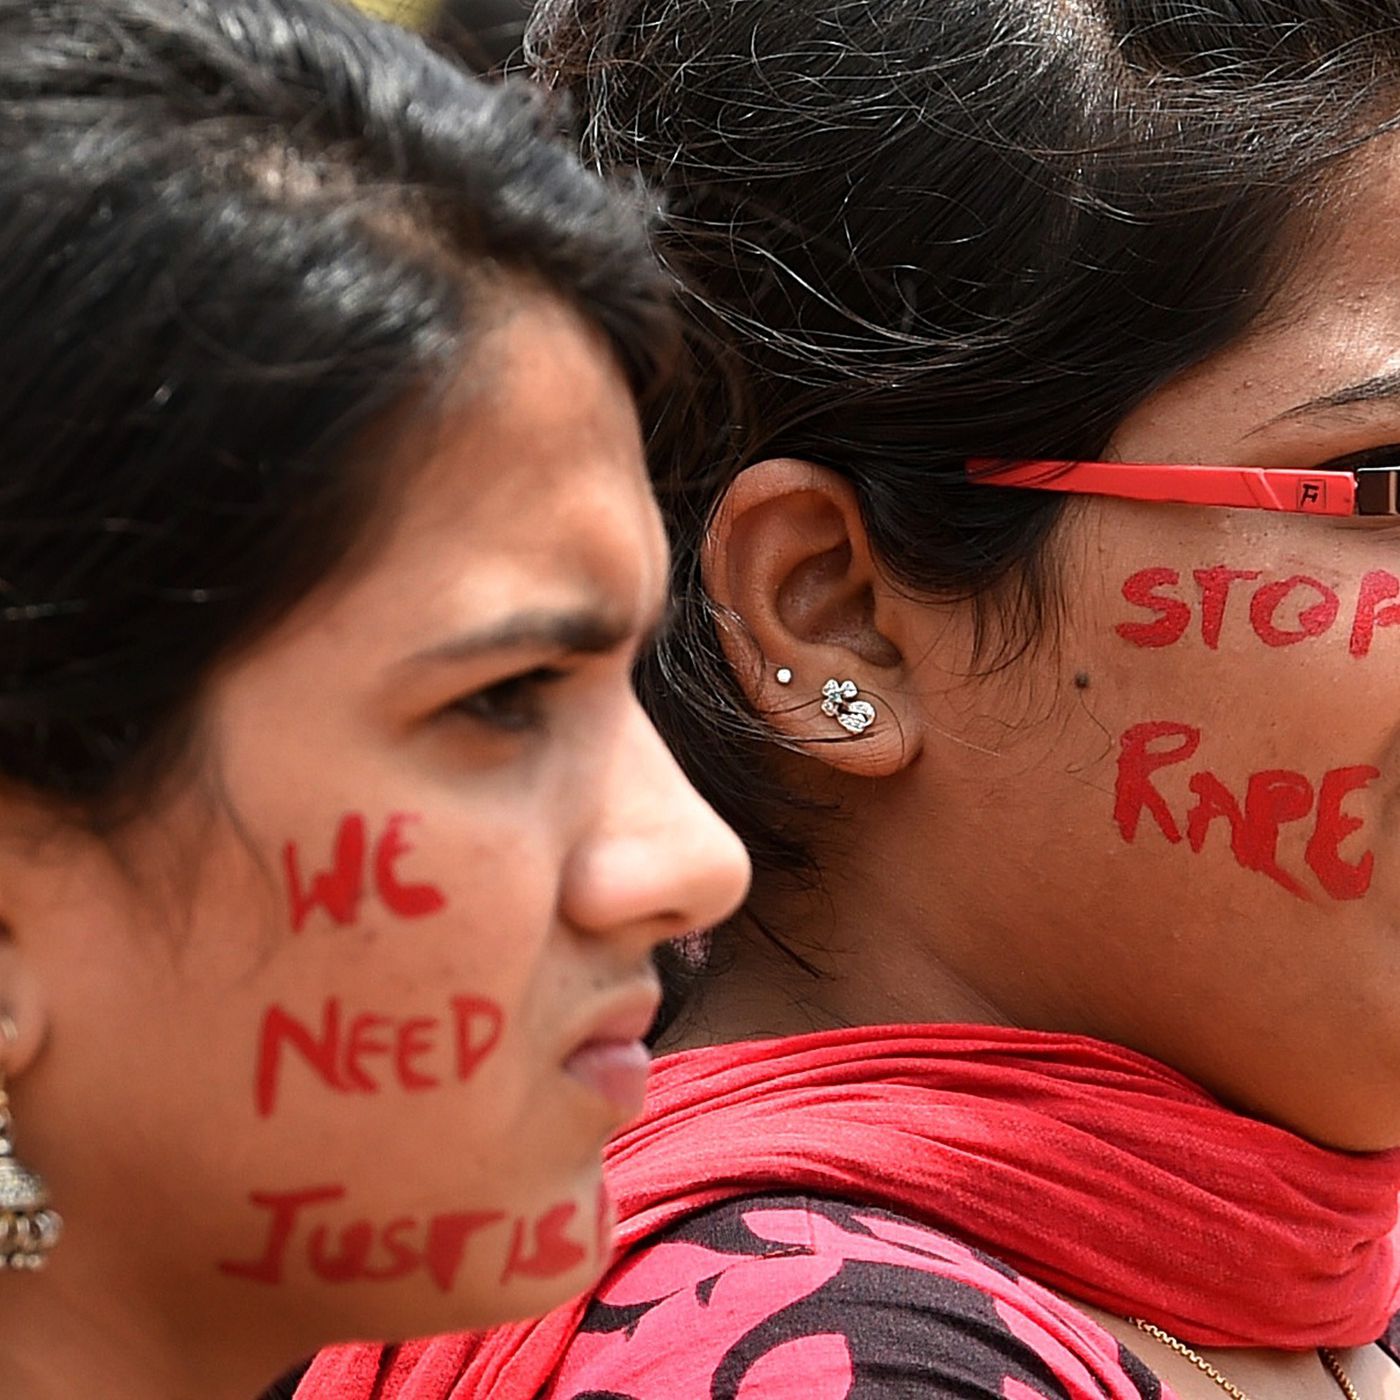 She should just be silent”: the real roots of India's rape culture - Vox